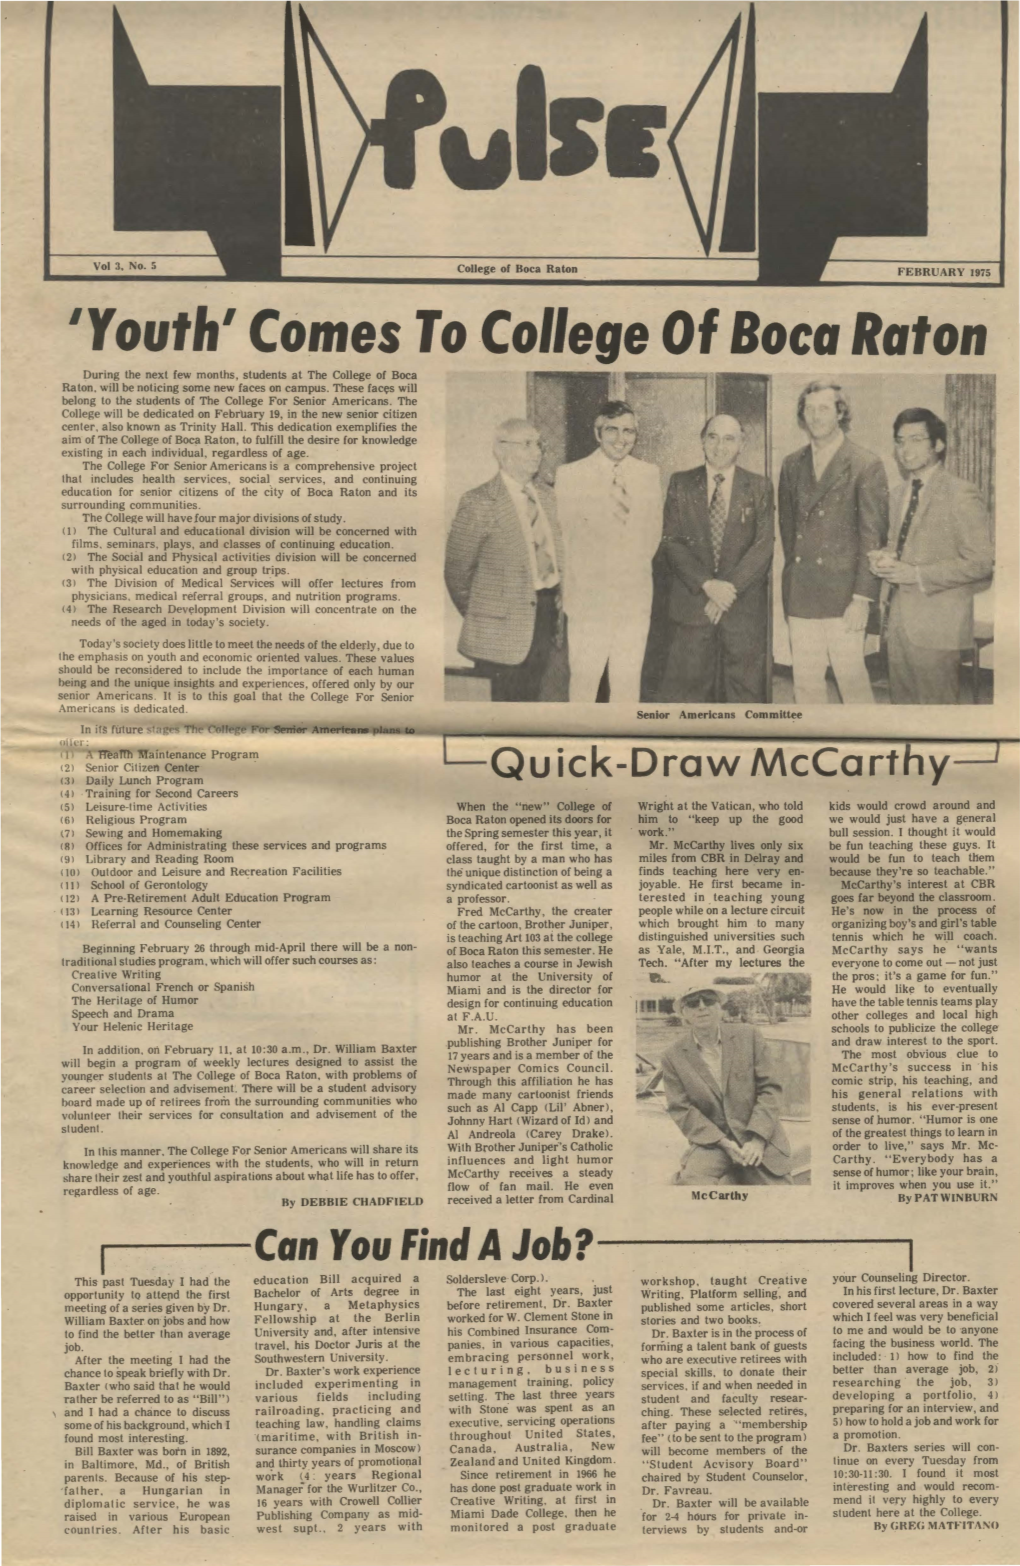 FEBRUARY 1975 'Youth' Comes to College of Boca Raton During the Next Few Months, Students at the College of Boca Raton, Will Be Noticing Some New Faces on Campus